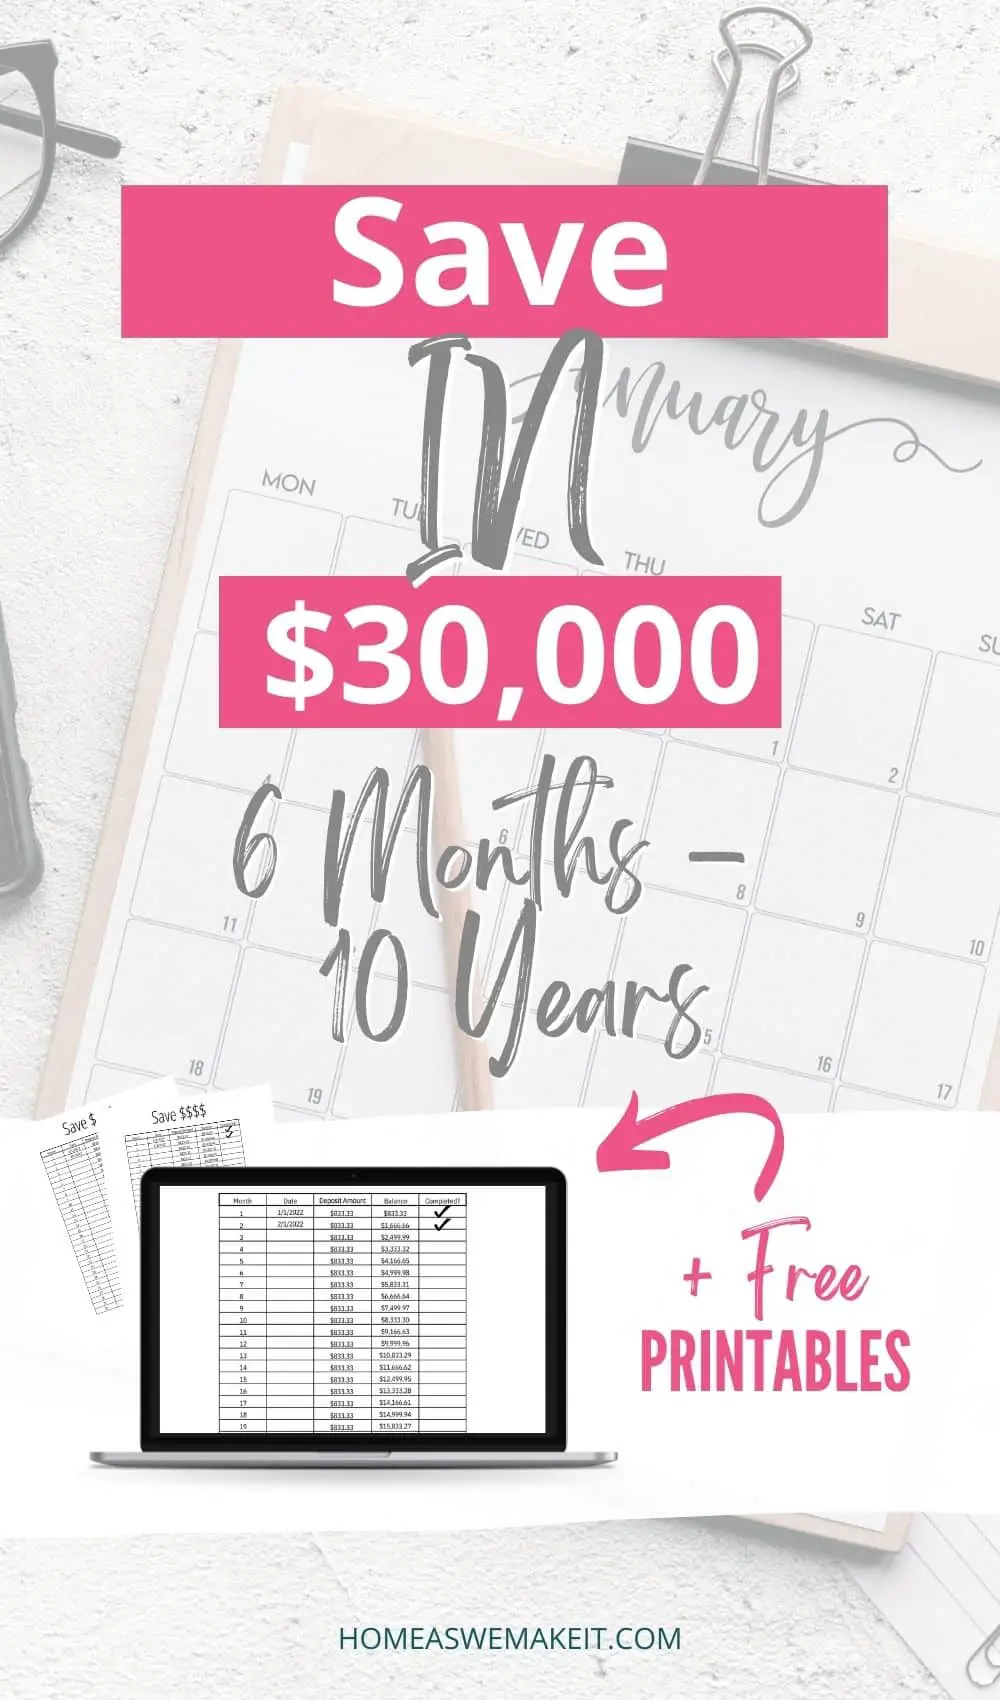 How to Save $30,000 with Money Saving Charts